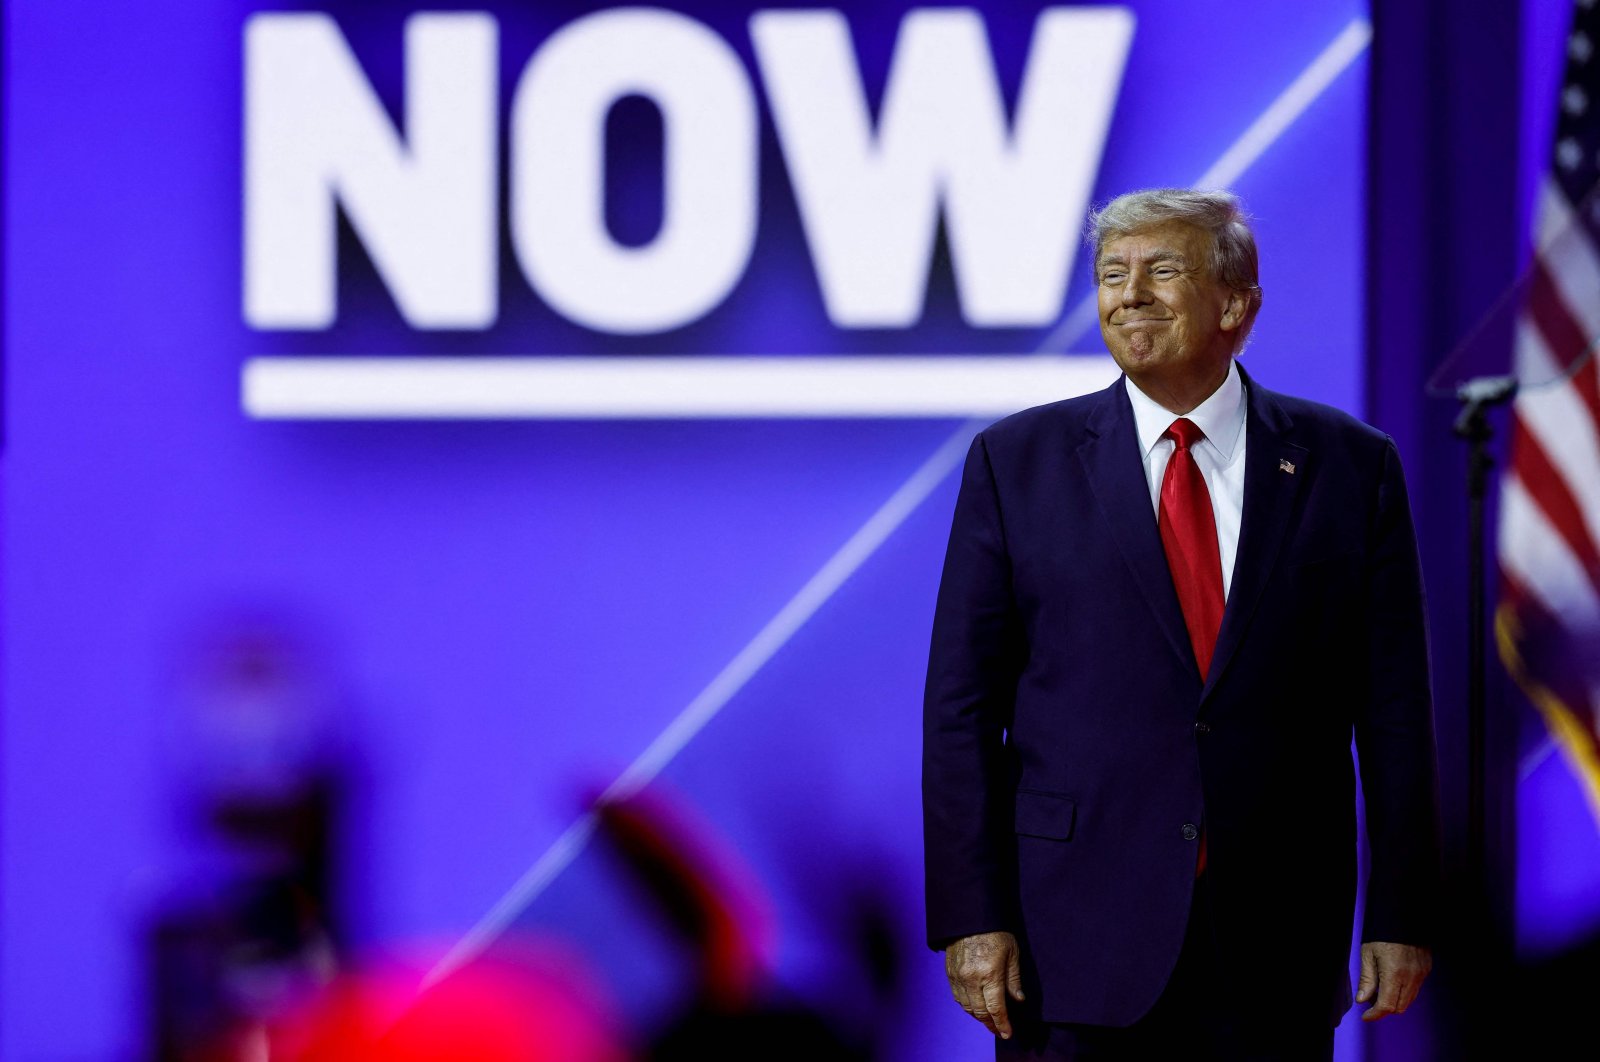 Former U.S. President and 2024 presidential hopeful Donald Trump at the 2023 CPAC, National Harbor, Maryland, U.S., March 4, 2023. (AFP Photo)